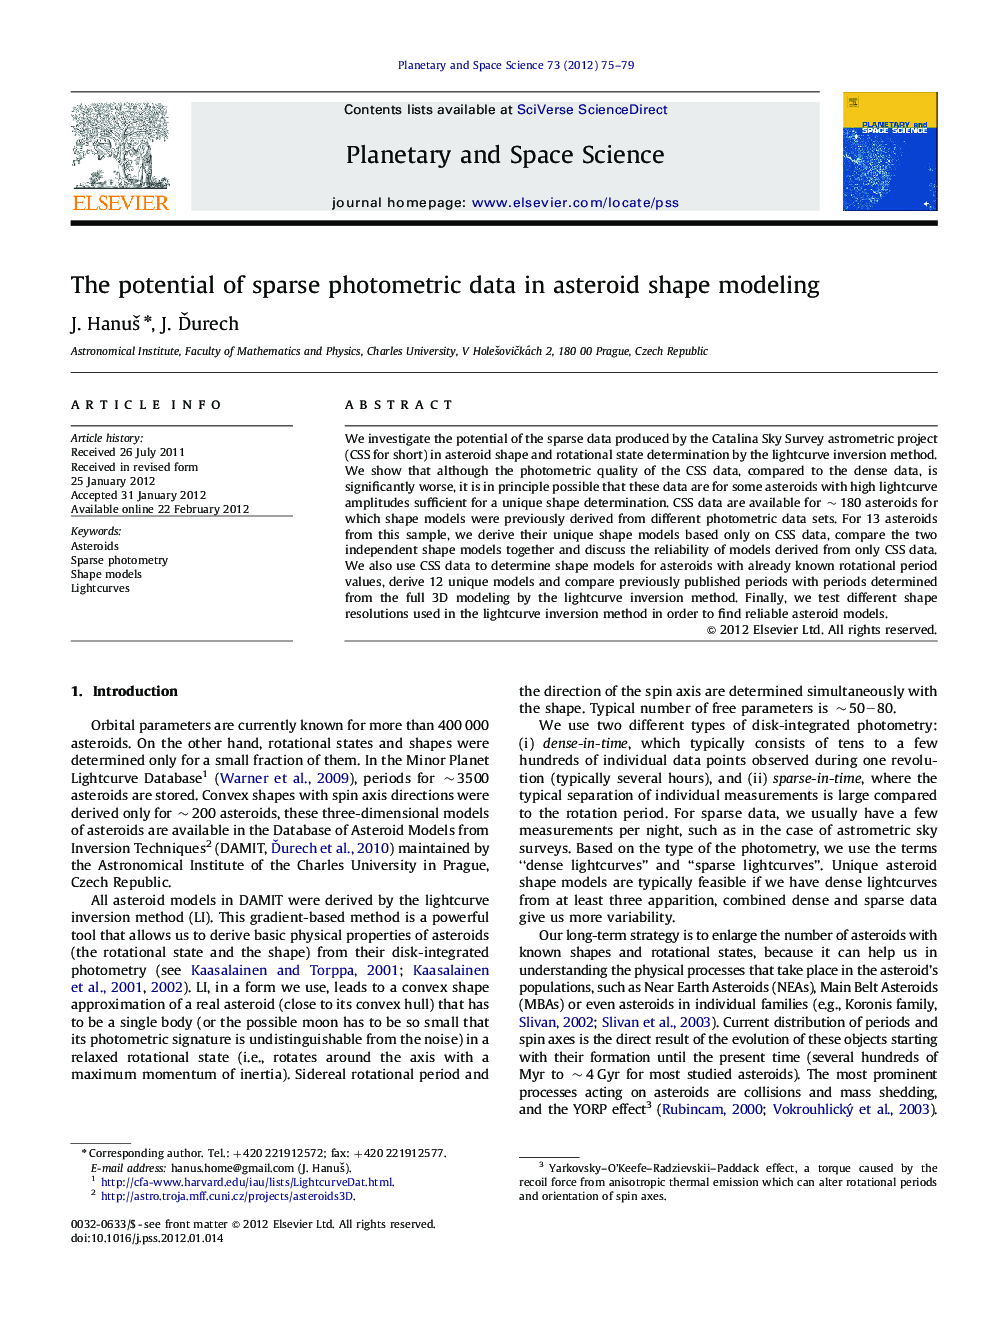 The potential of sparse photometric data in asteroid shape modeling